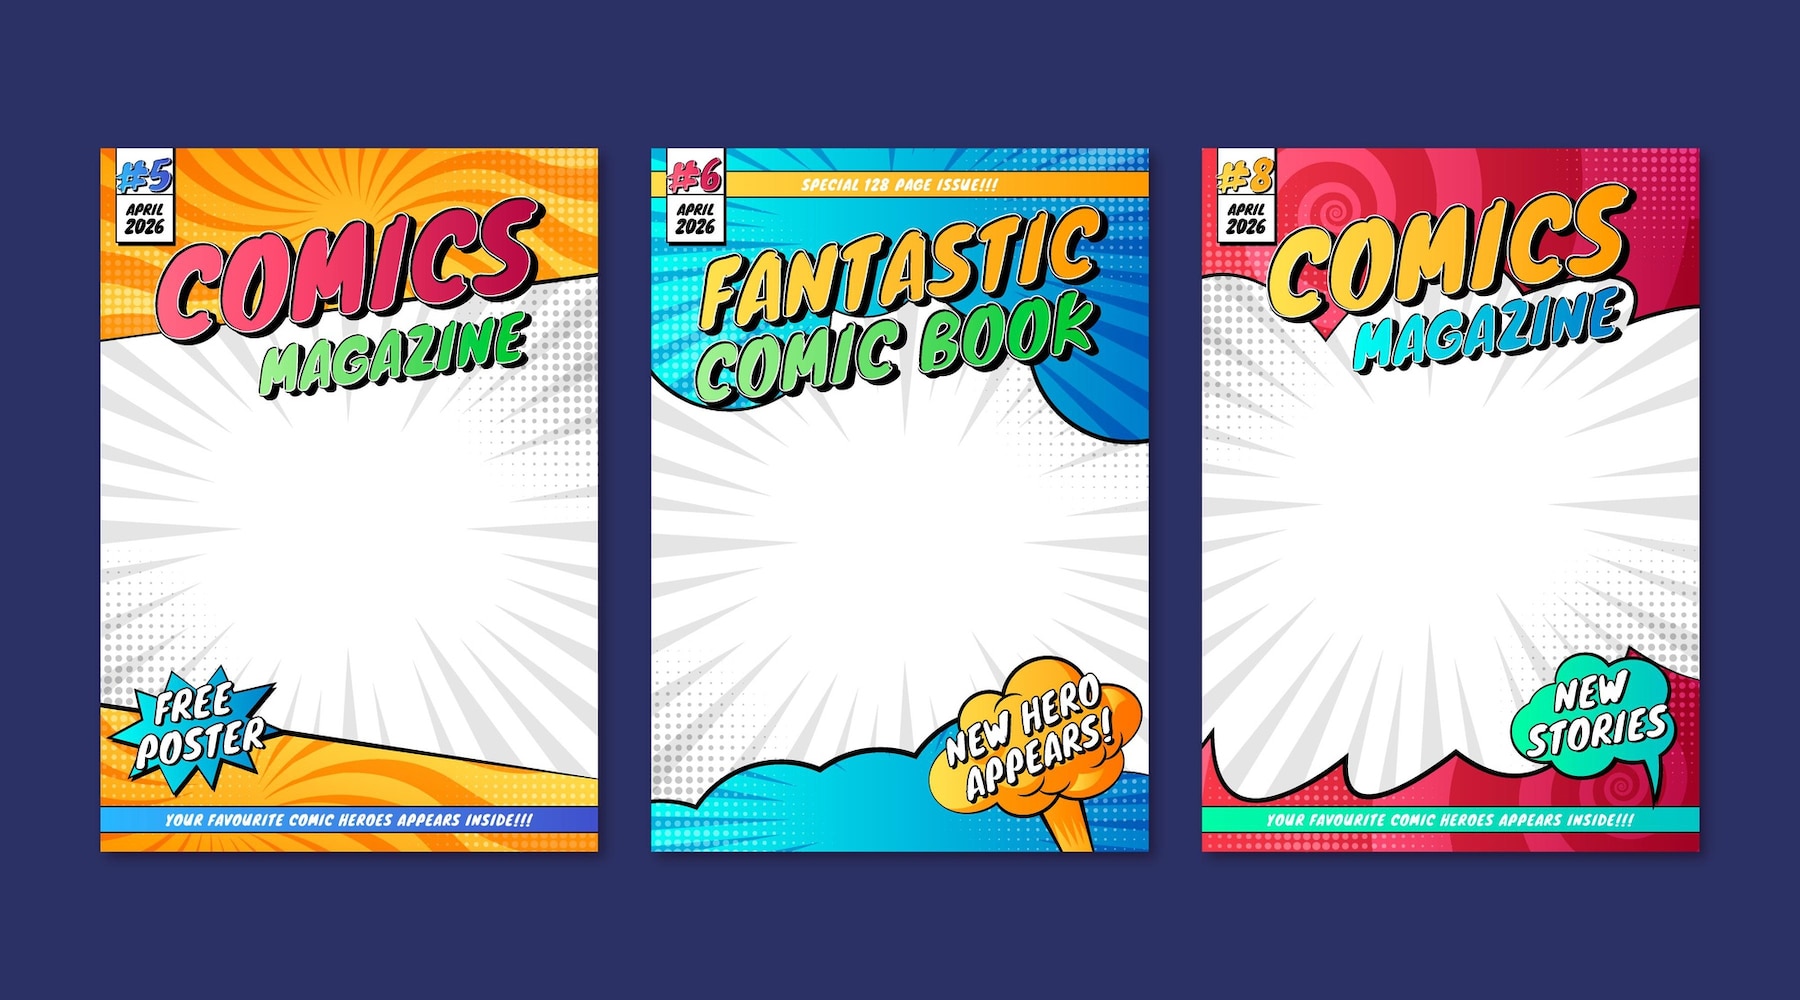 Make Your Own Comic Book Kit: A step-by-step guide for learning to draw  comic book characters and making your own comic book (Kit)